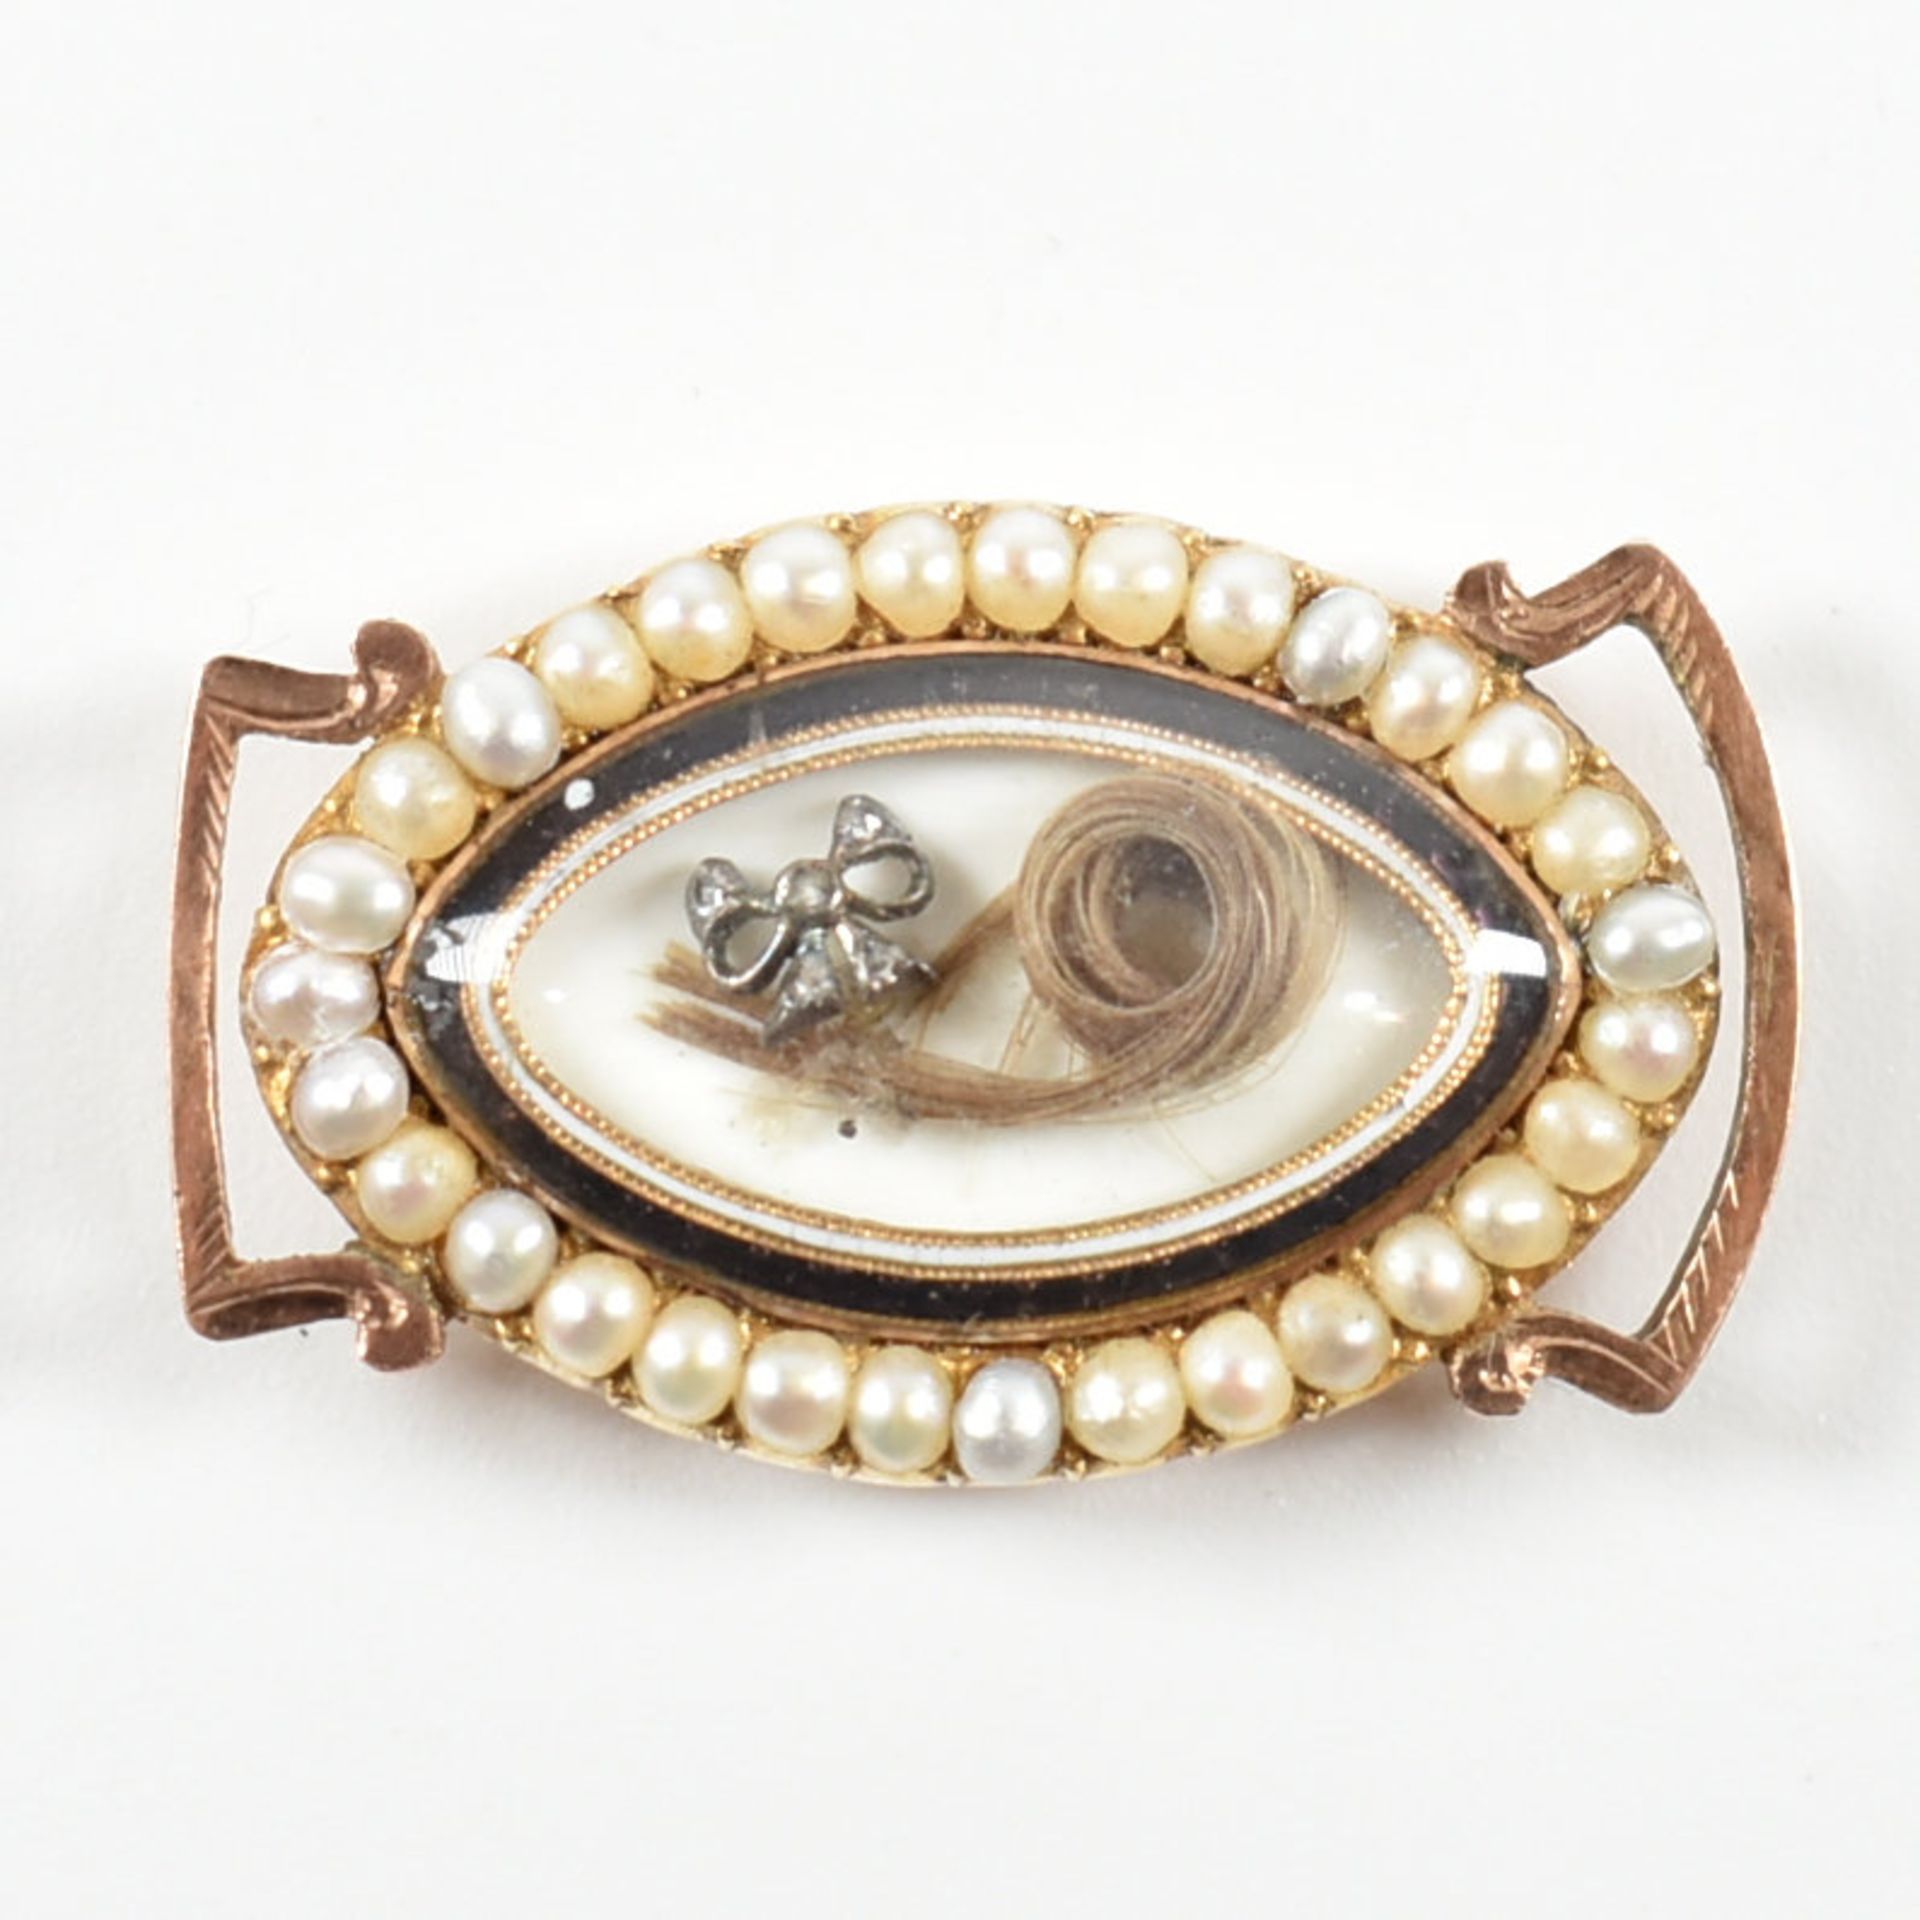 19TH CENTURY GOLD DIAMOND & PEARL MOURNING SLIDE - Image 2 of 5